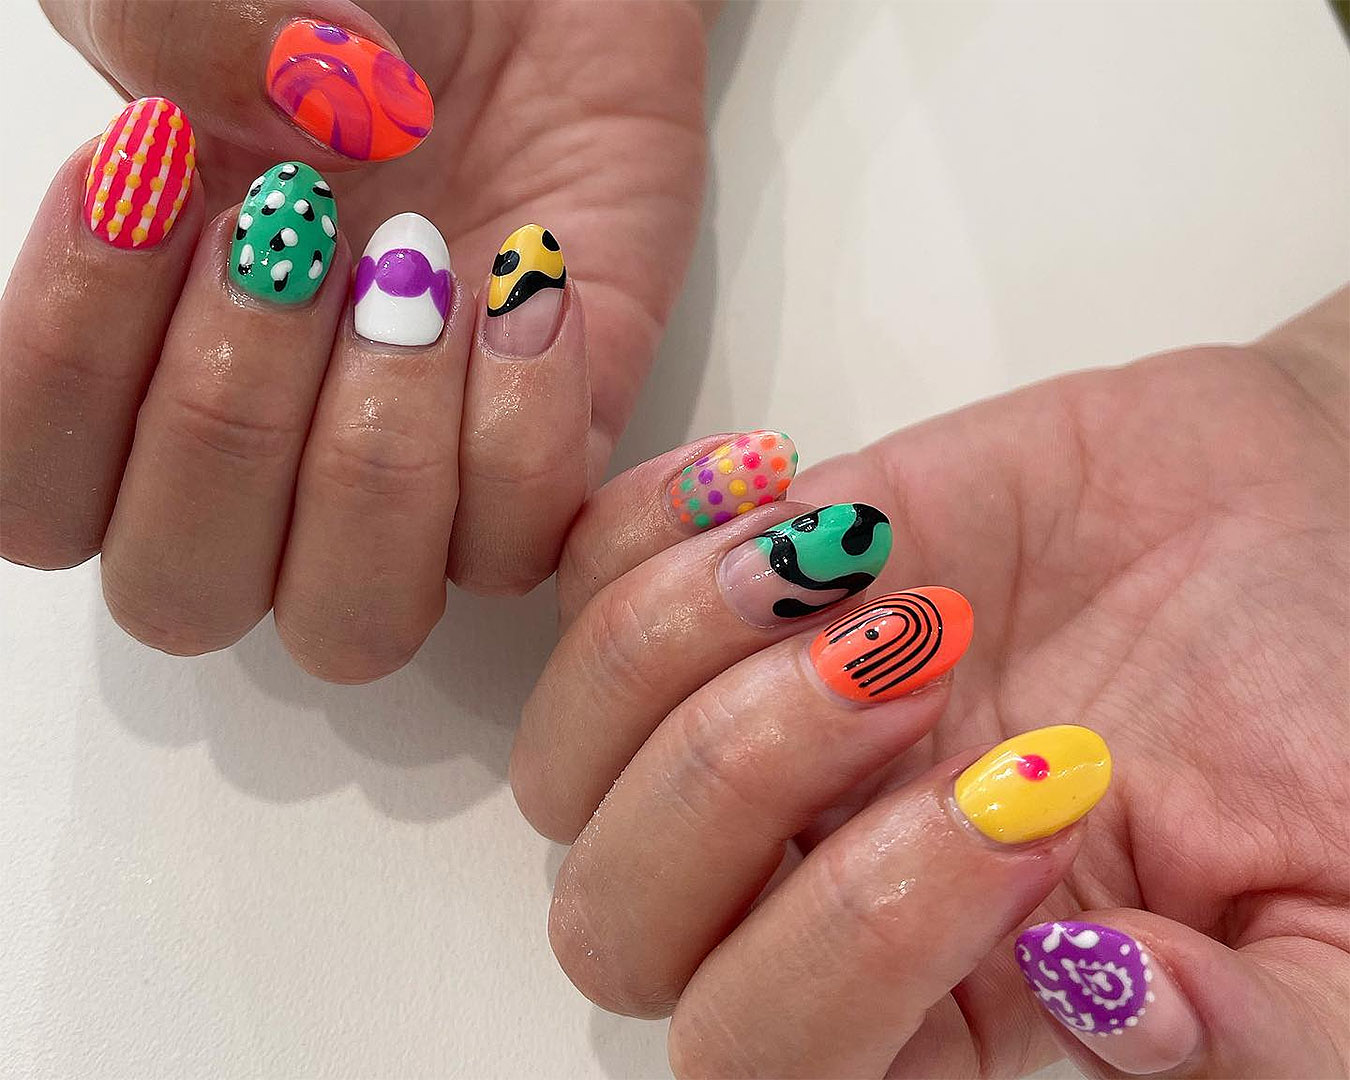 Colourful nails of every description at nails by brooke hunter.